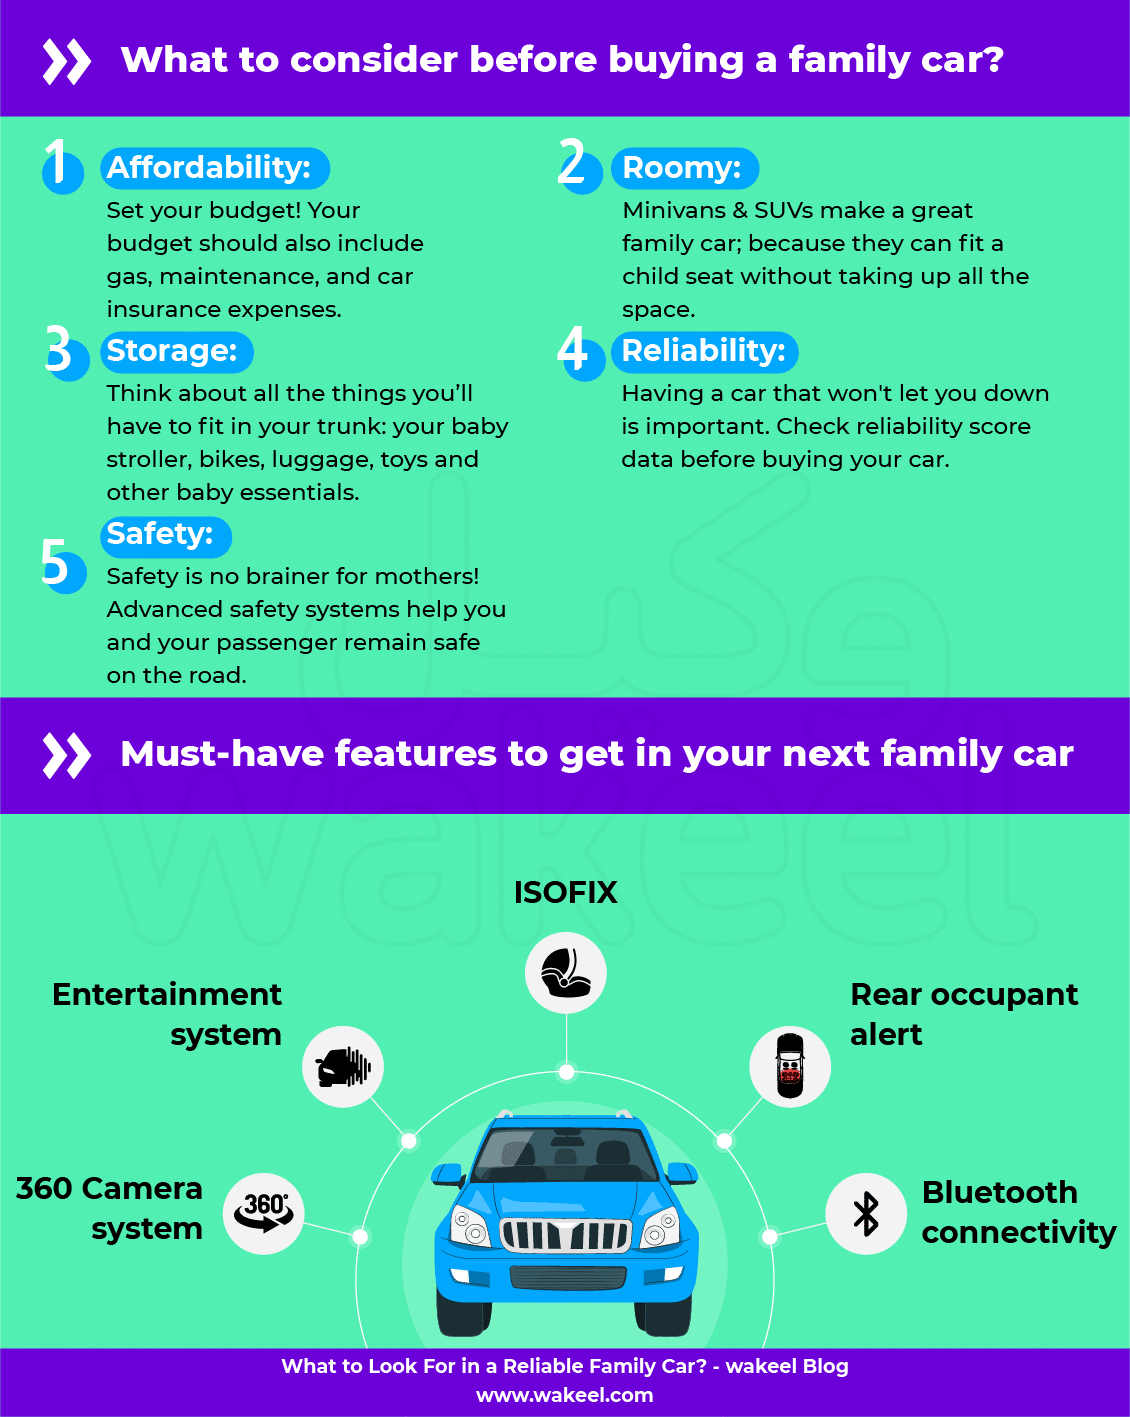 There are many things to consider when buying a family car, such as vehicle size, safety, and entertainment systems.